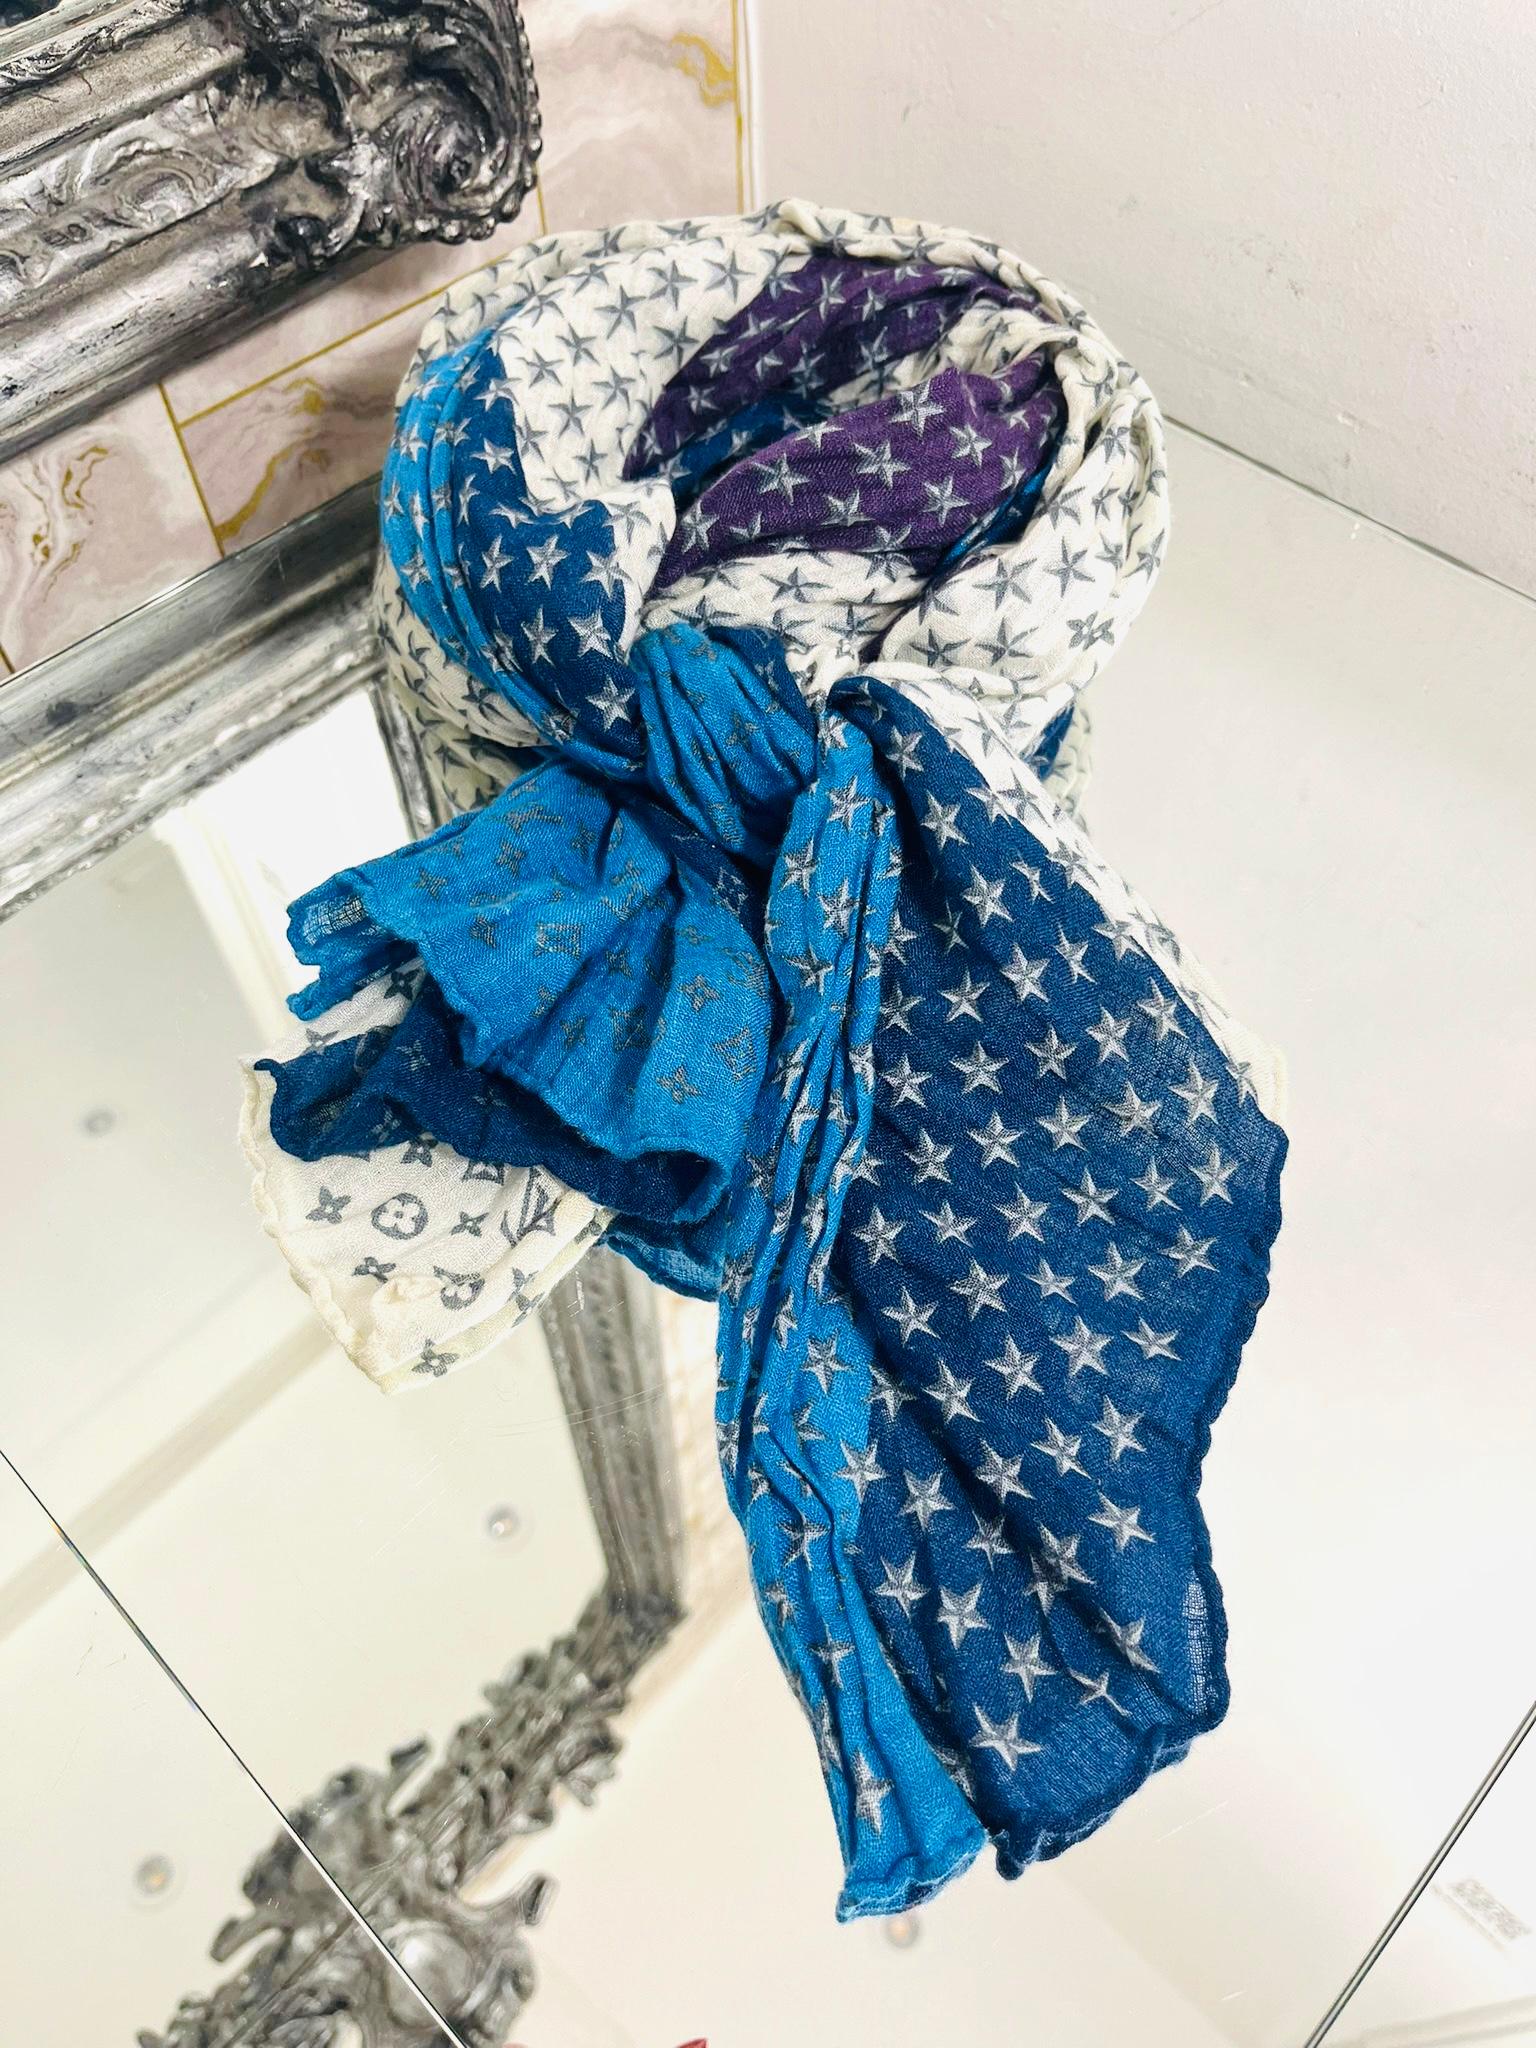 Louis Vuitton Linen & Silk Monogram Scarf

Stole scarf featuring patchwork design in navy, blue, purple and white.

Detailed with iconic monogram and stars prints.

Size – 57/100cm

Condition – Good (Minor mark to the fabric)

Composition – 70%